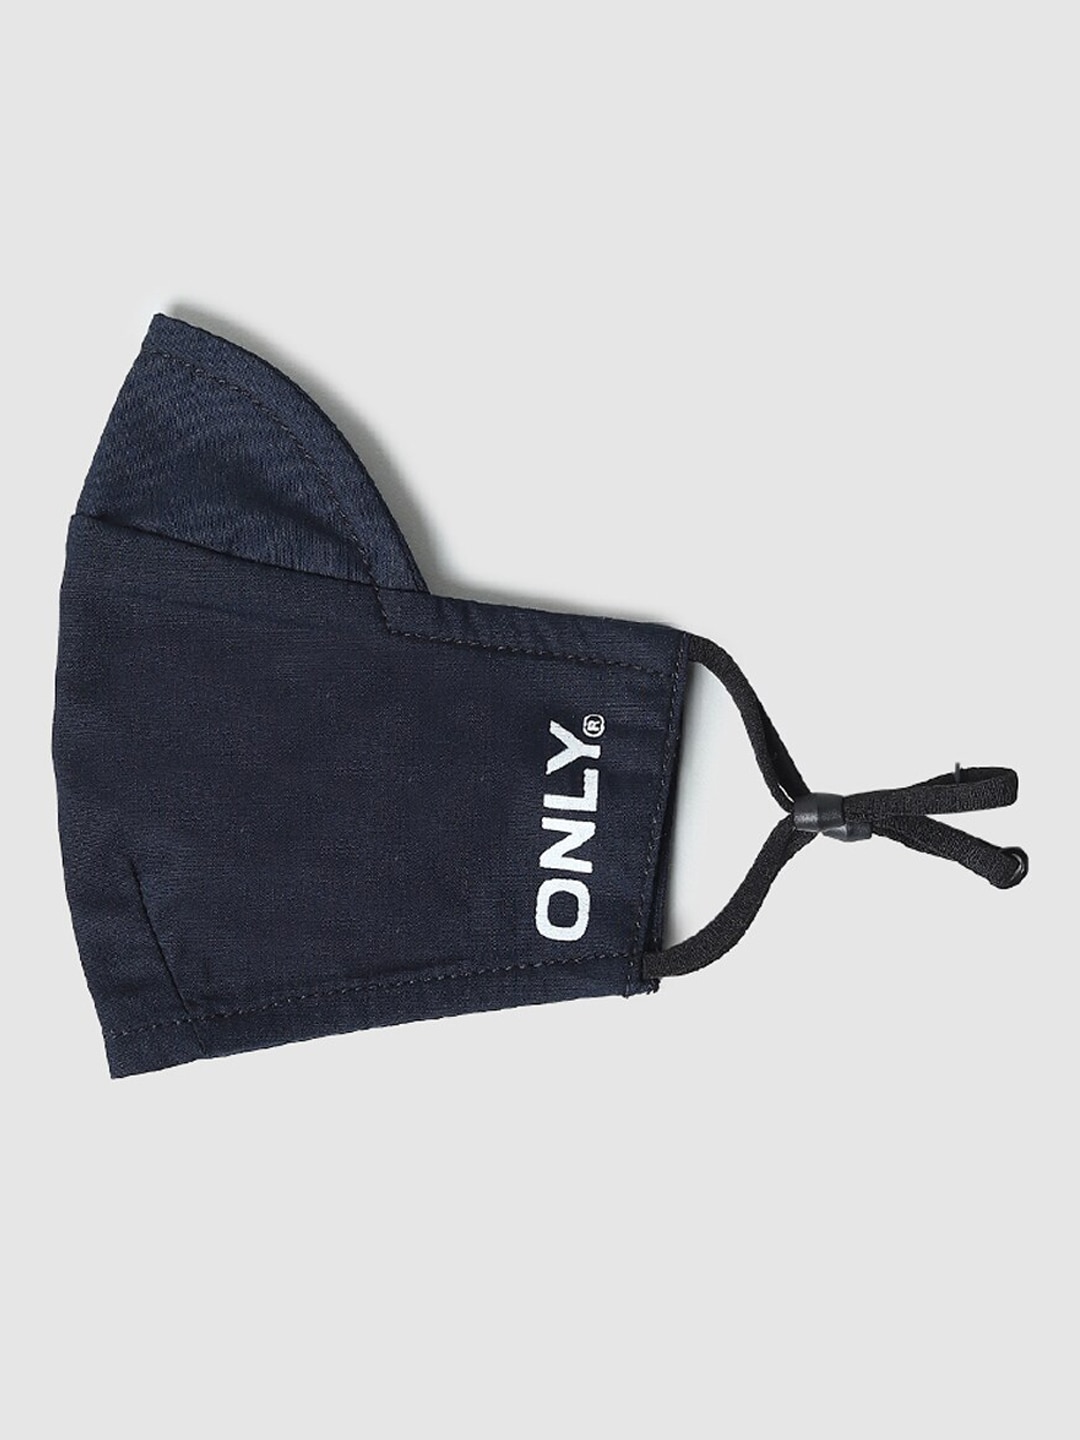 ONLY Women Pack Of 2 Navy Blue Brand-Logo Printed Cotton Outdoor Masks Price in India